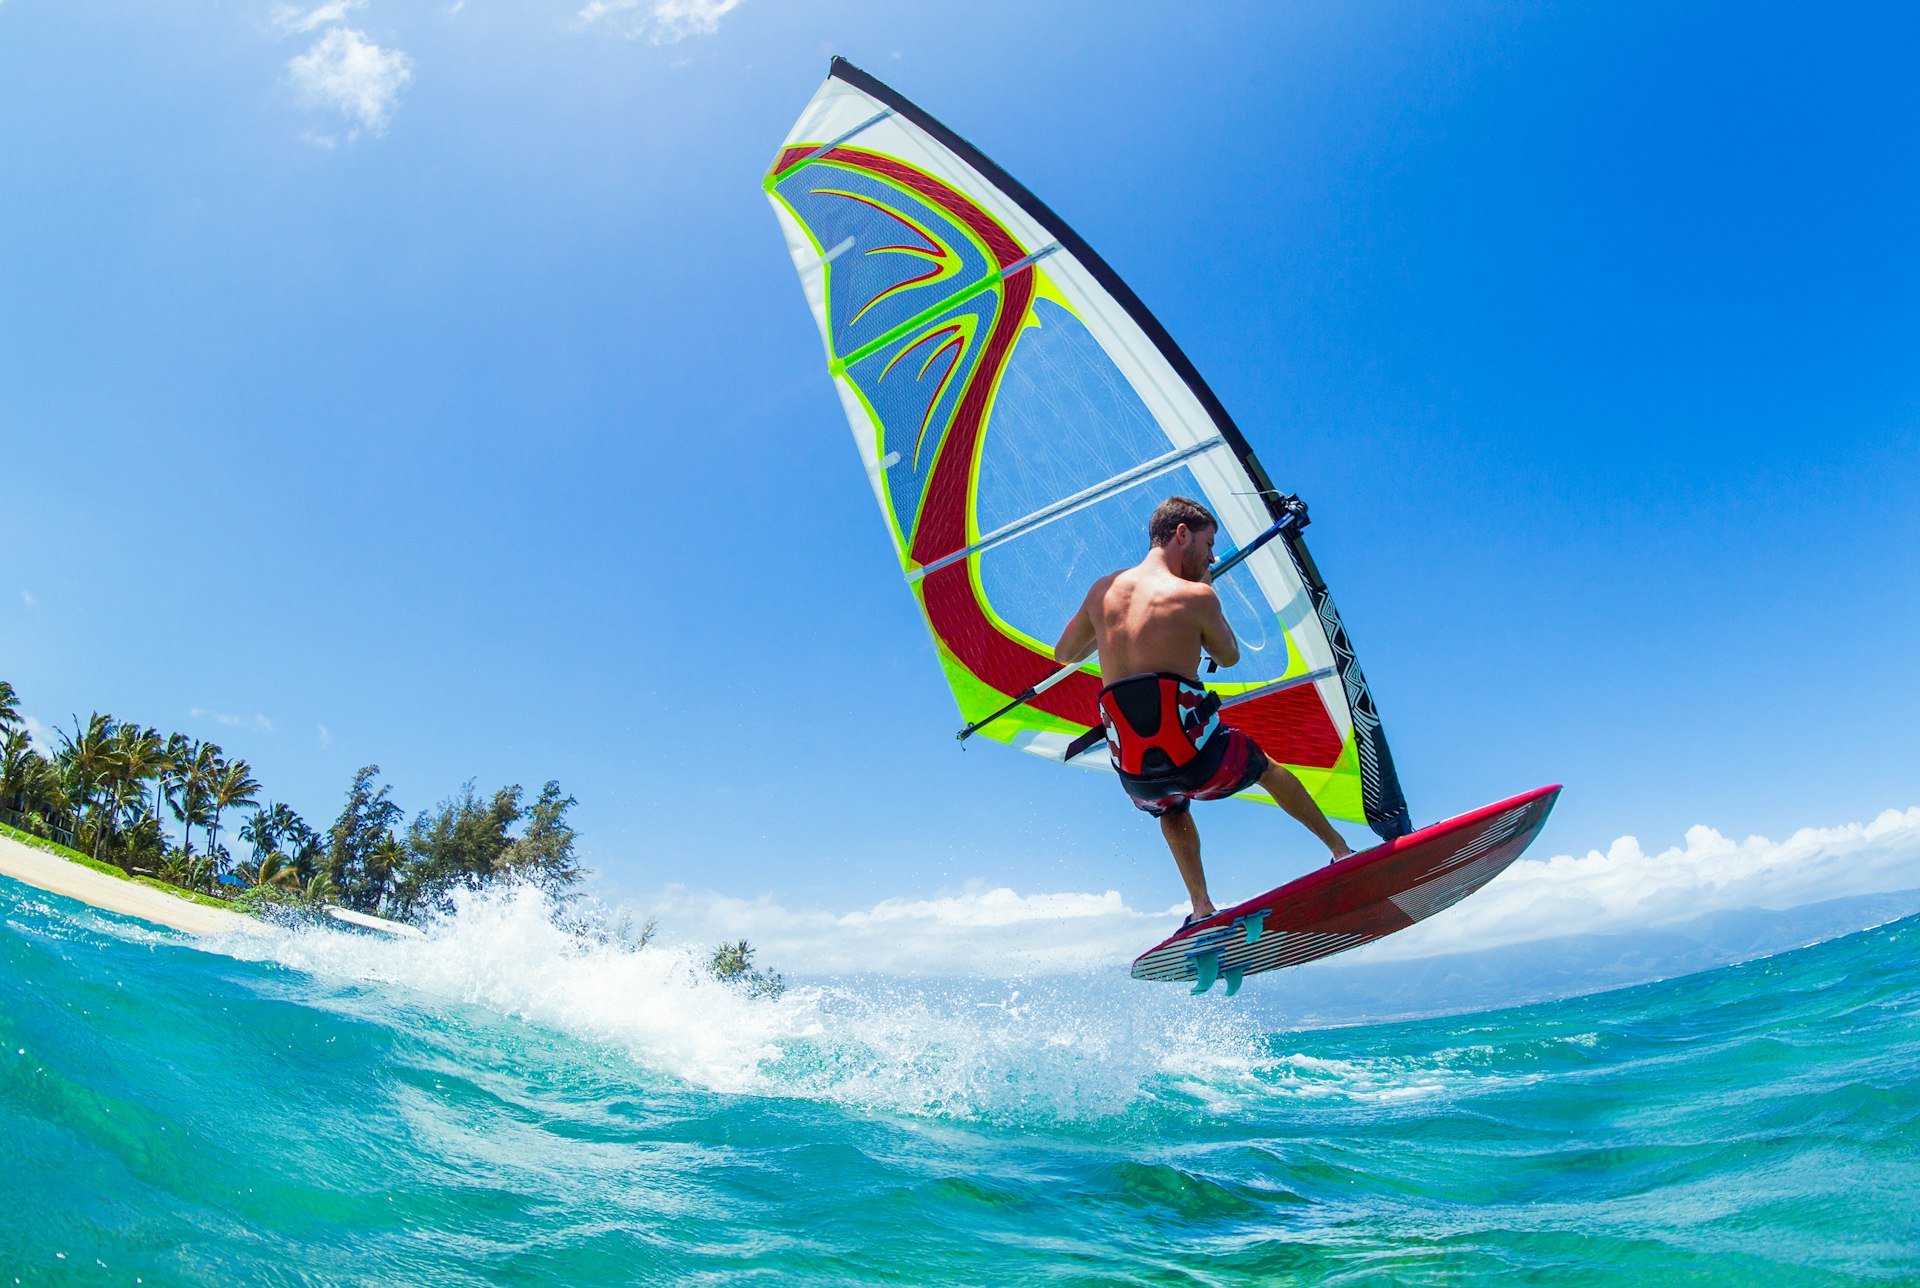 a man on a windsurfing board skips over a wave